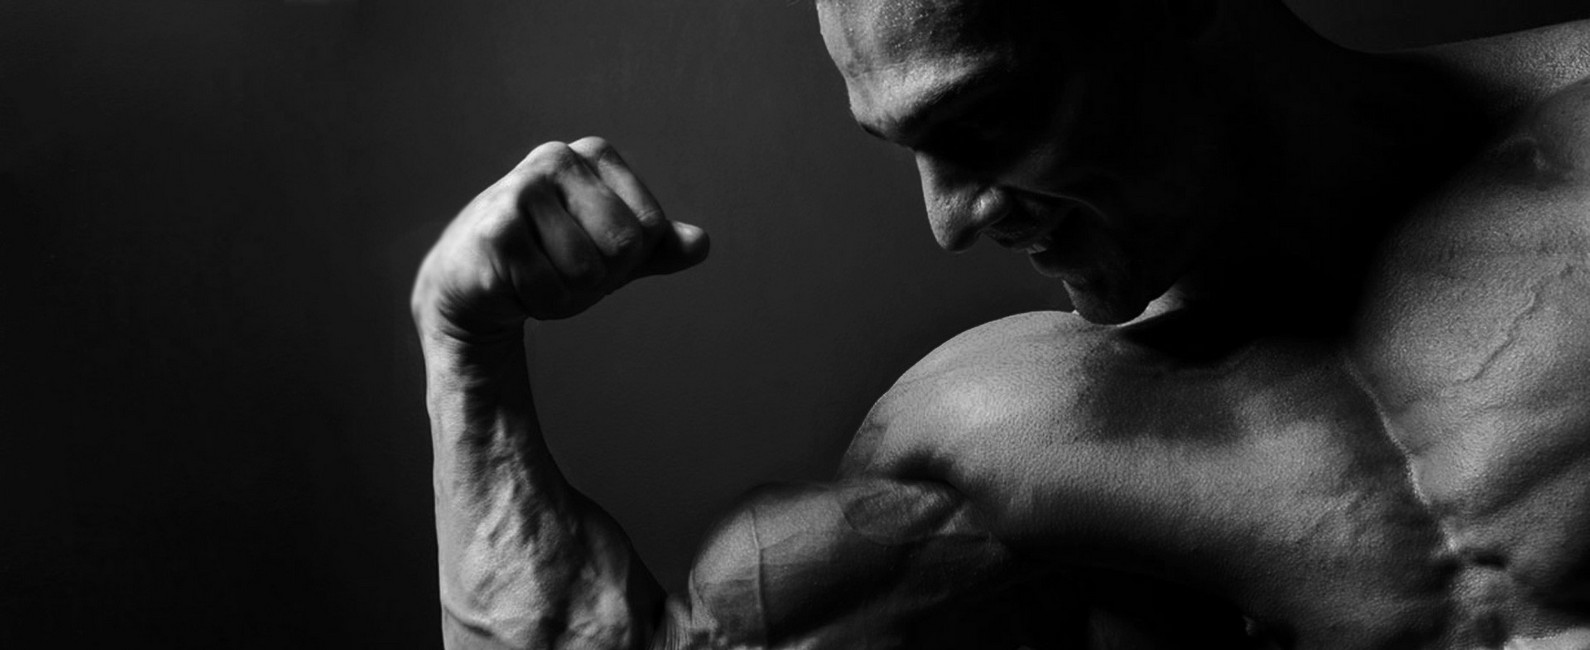 Side effects of anabolic steroid use in males include which of the following